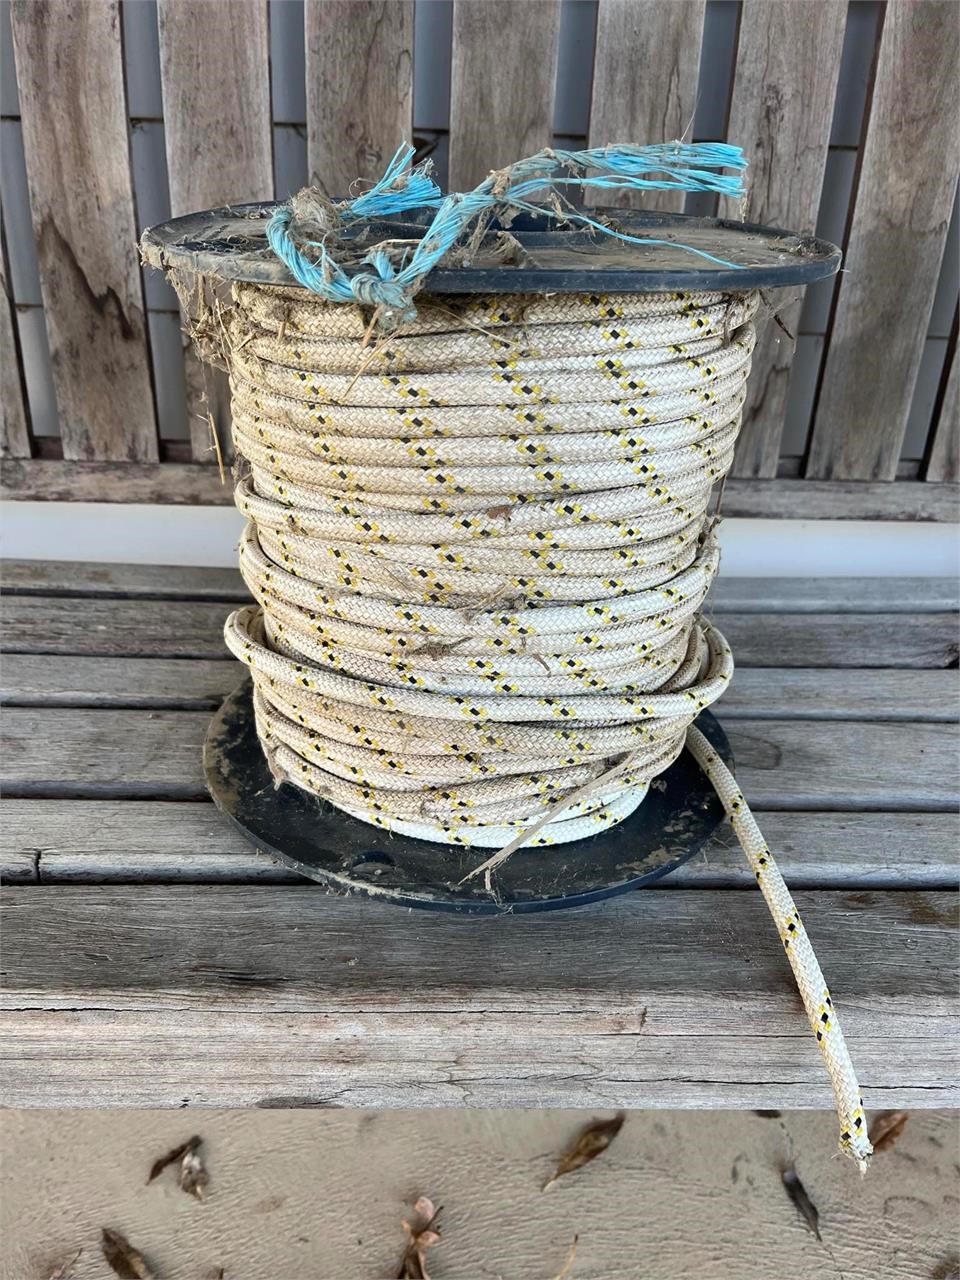 (Private) ROLL OF 10mm ROPE